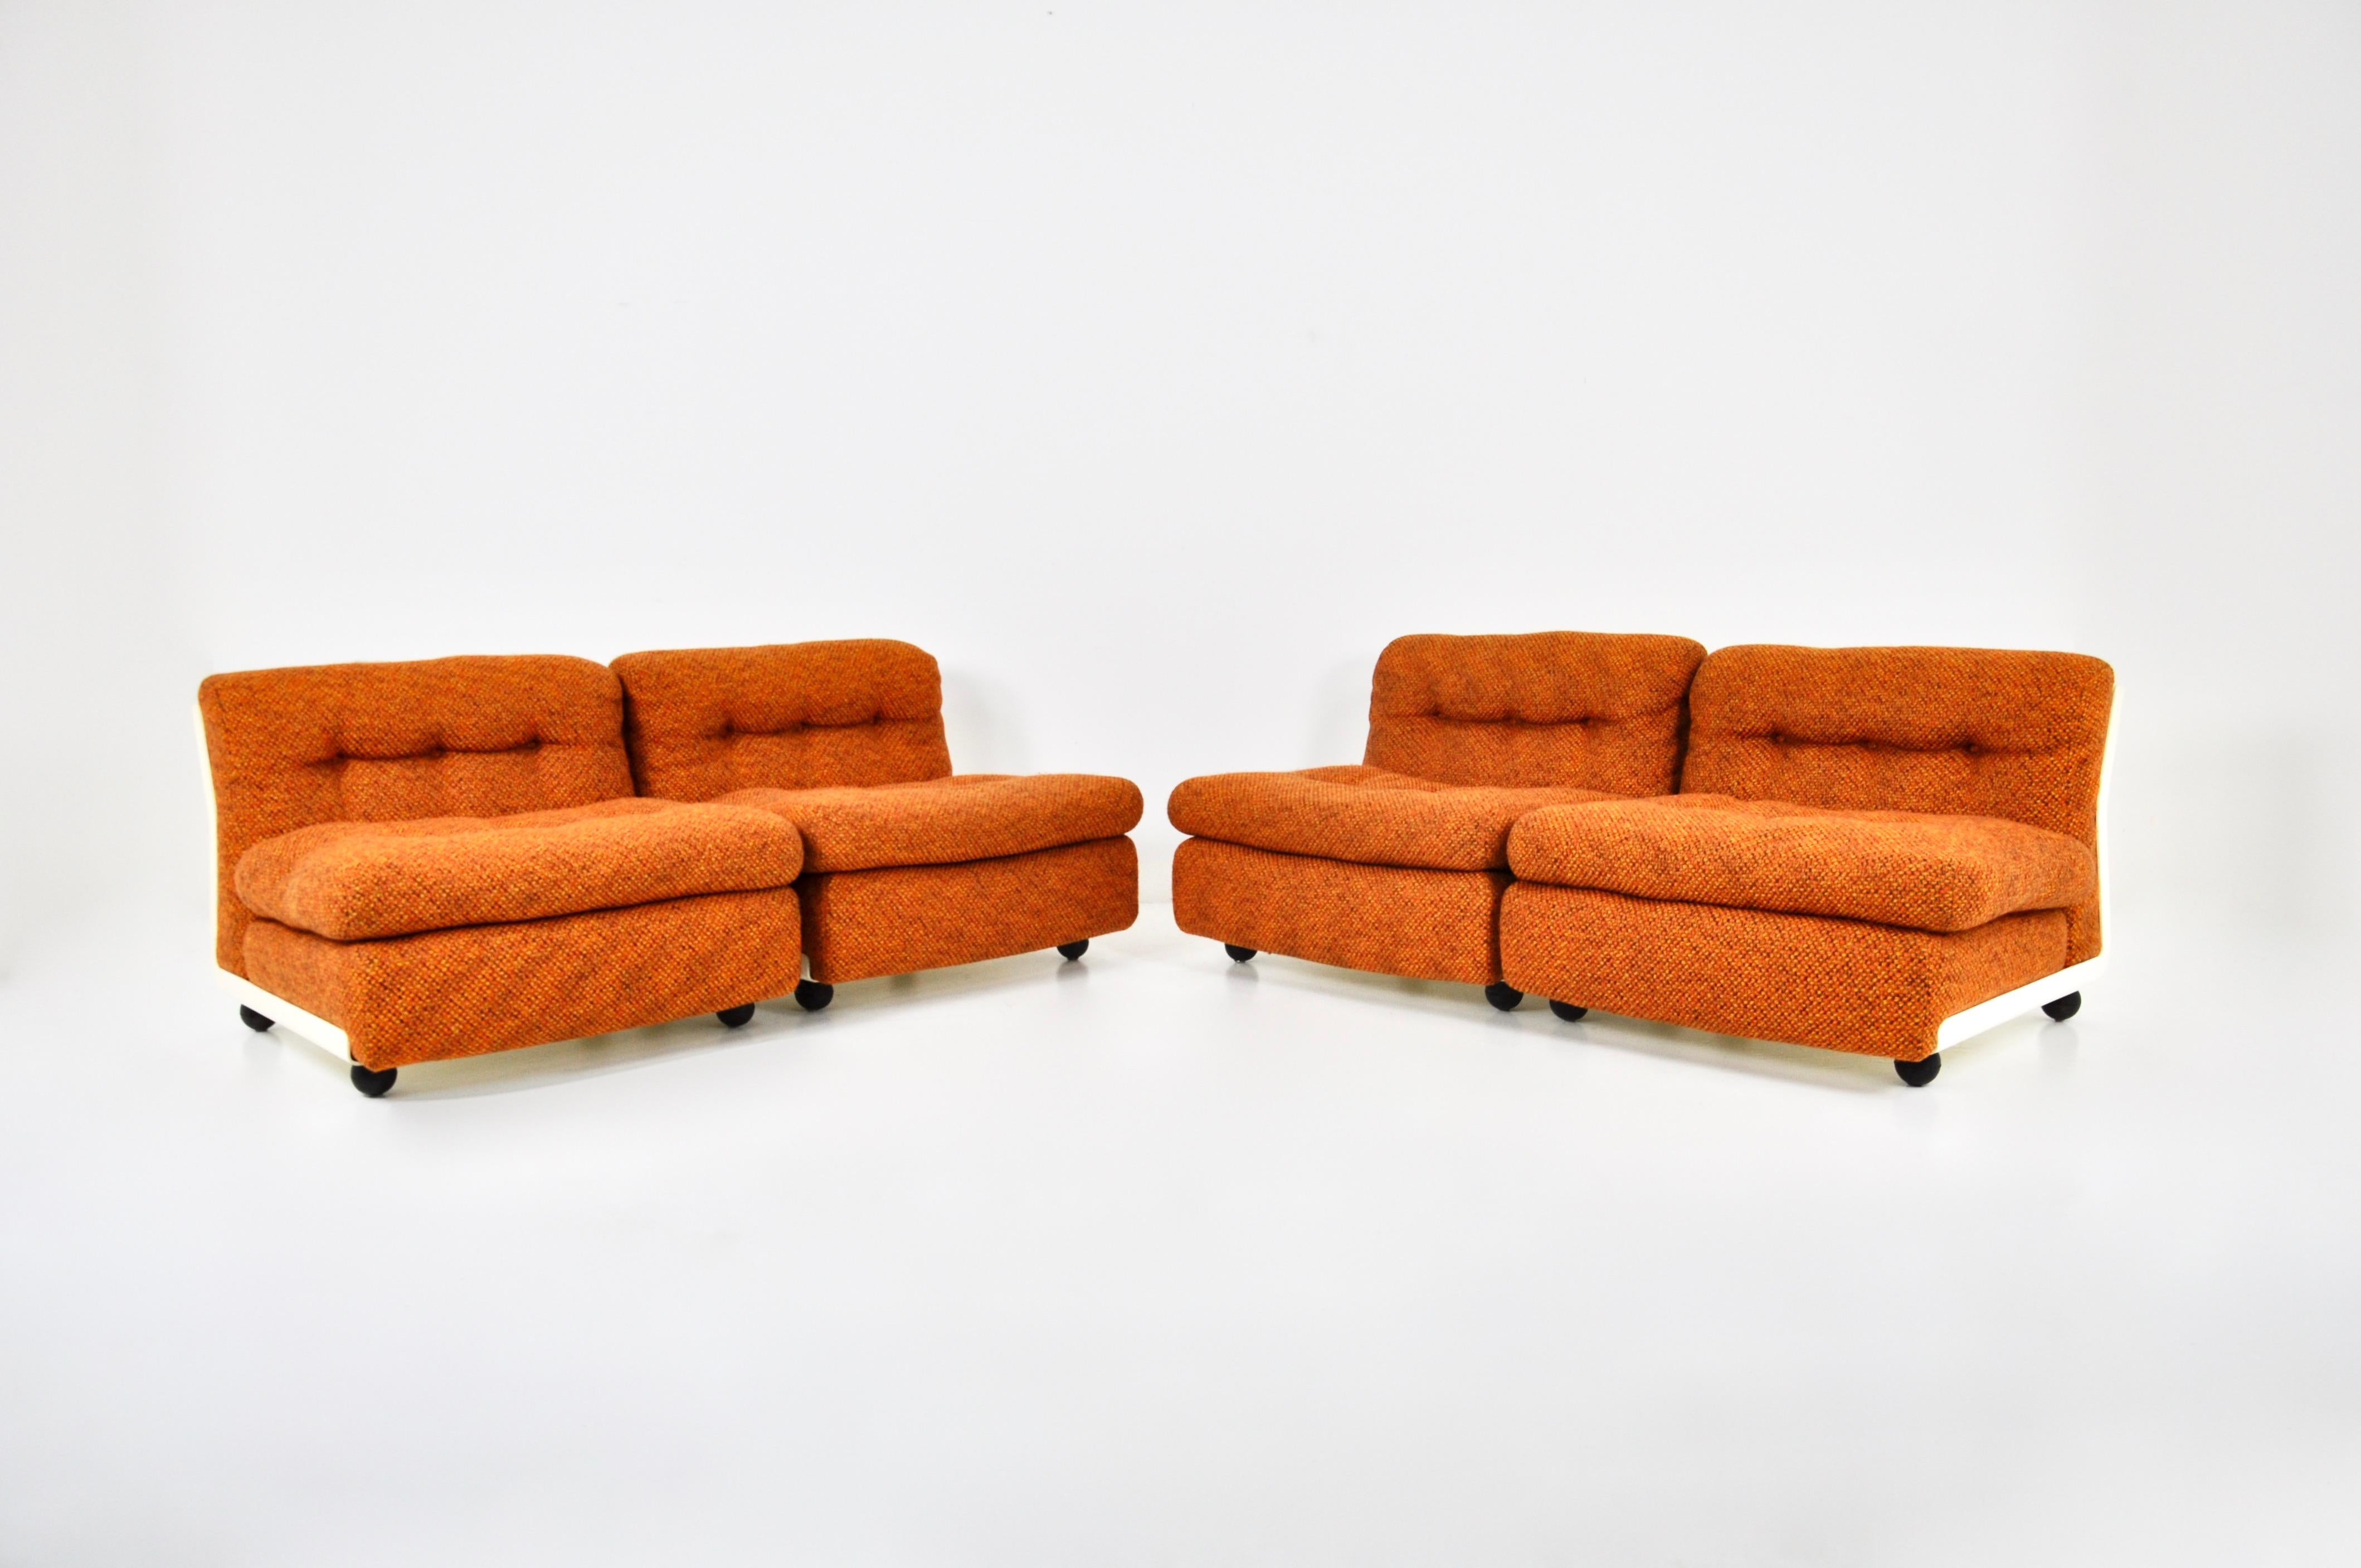 Mid-20th Century Amanta Lounge chairs by Mario Bellini for C&B Italia, 1960s, set of 4